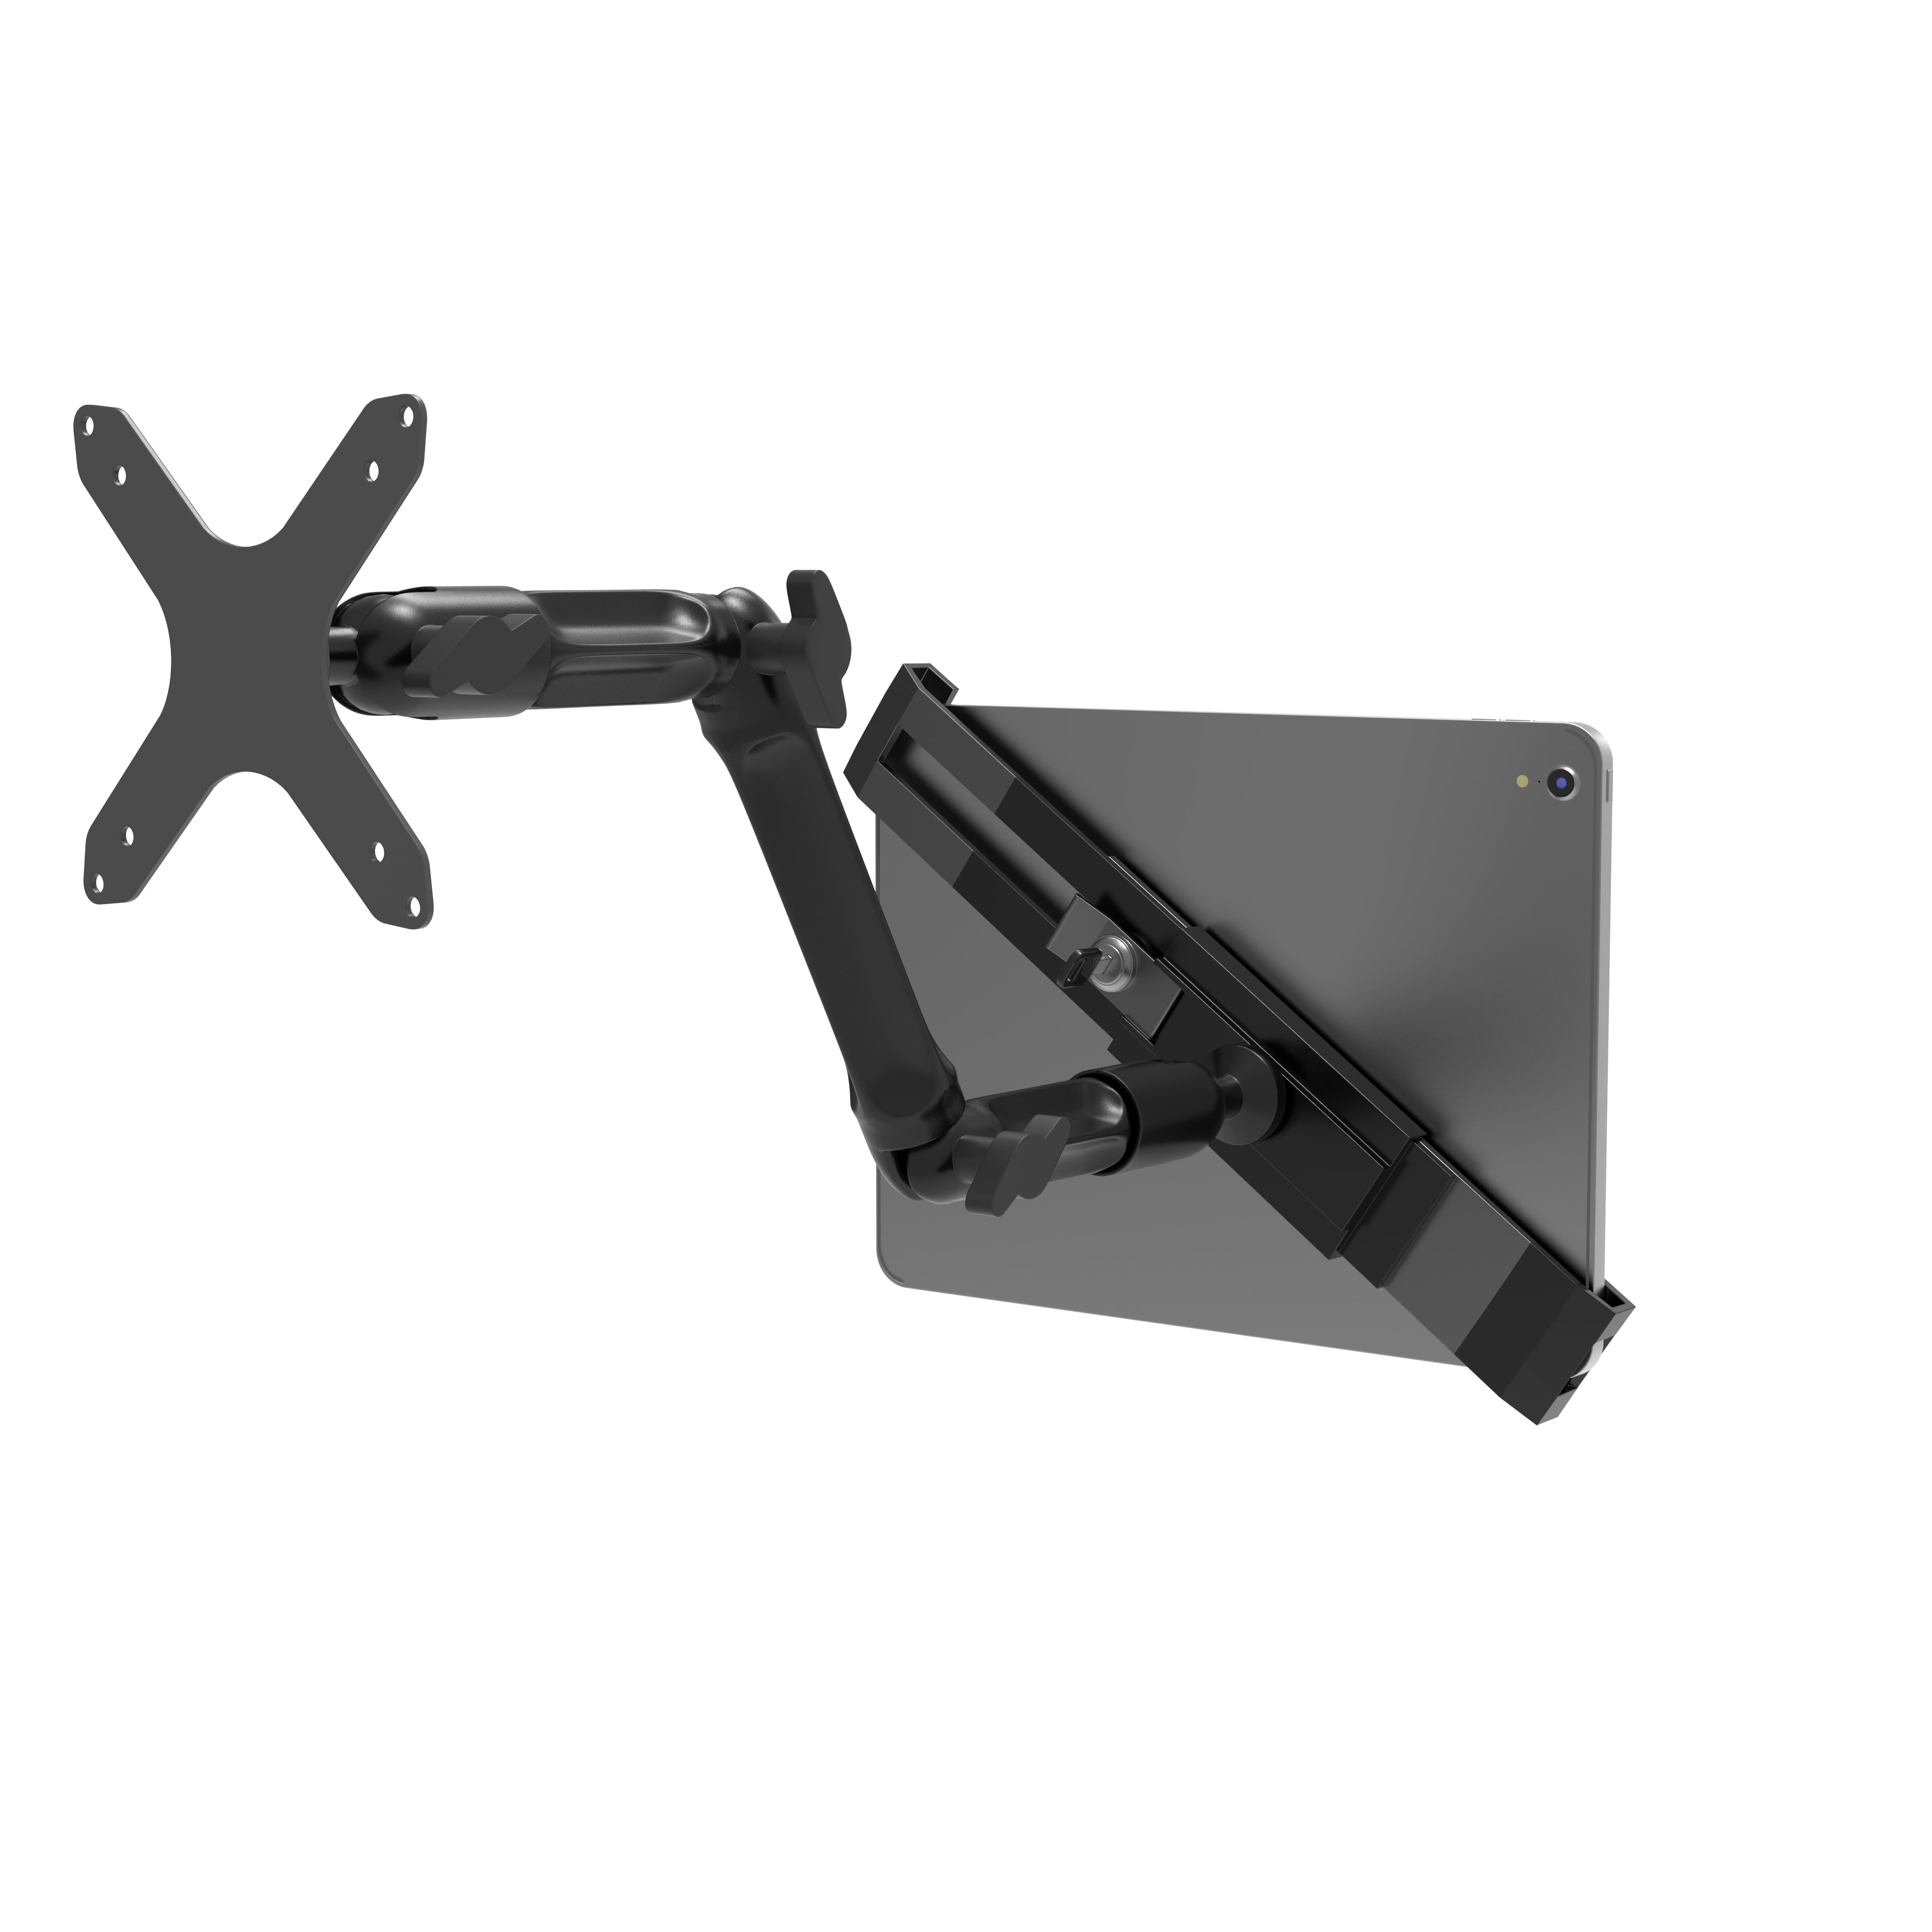 Custom Flex Security Wall Mount for 7 - 14 Inch Tablets